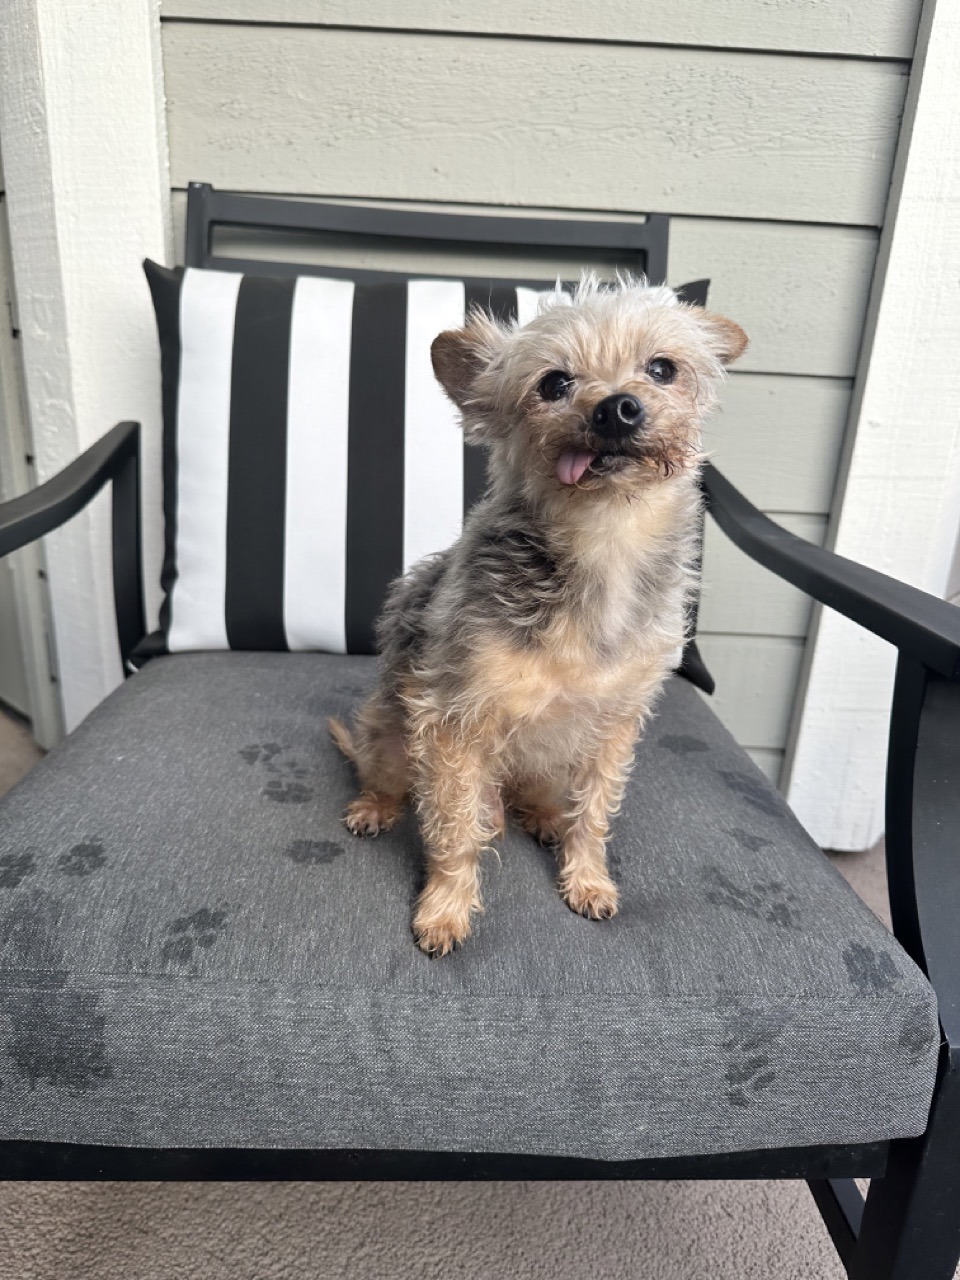 A yorkie with his tongue sticking out sitting on a chair